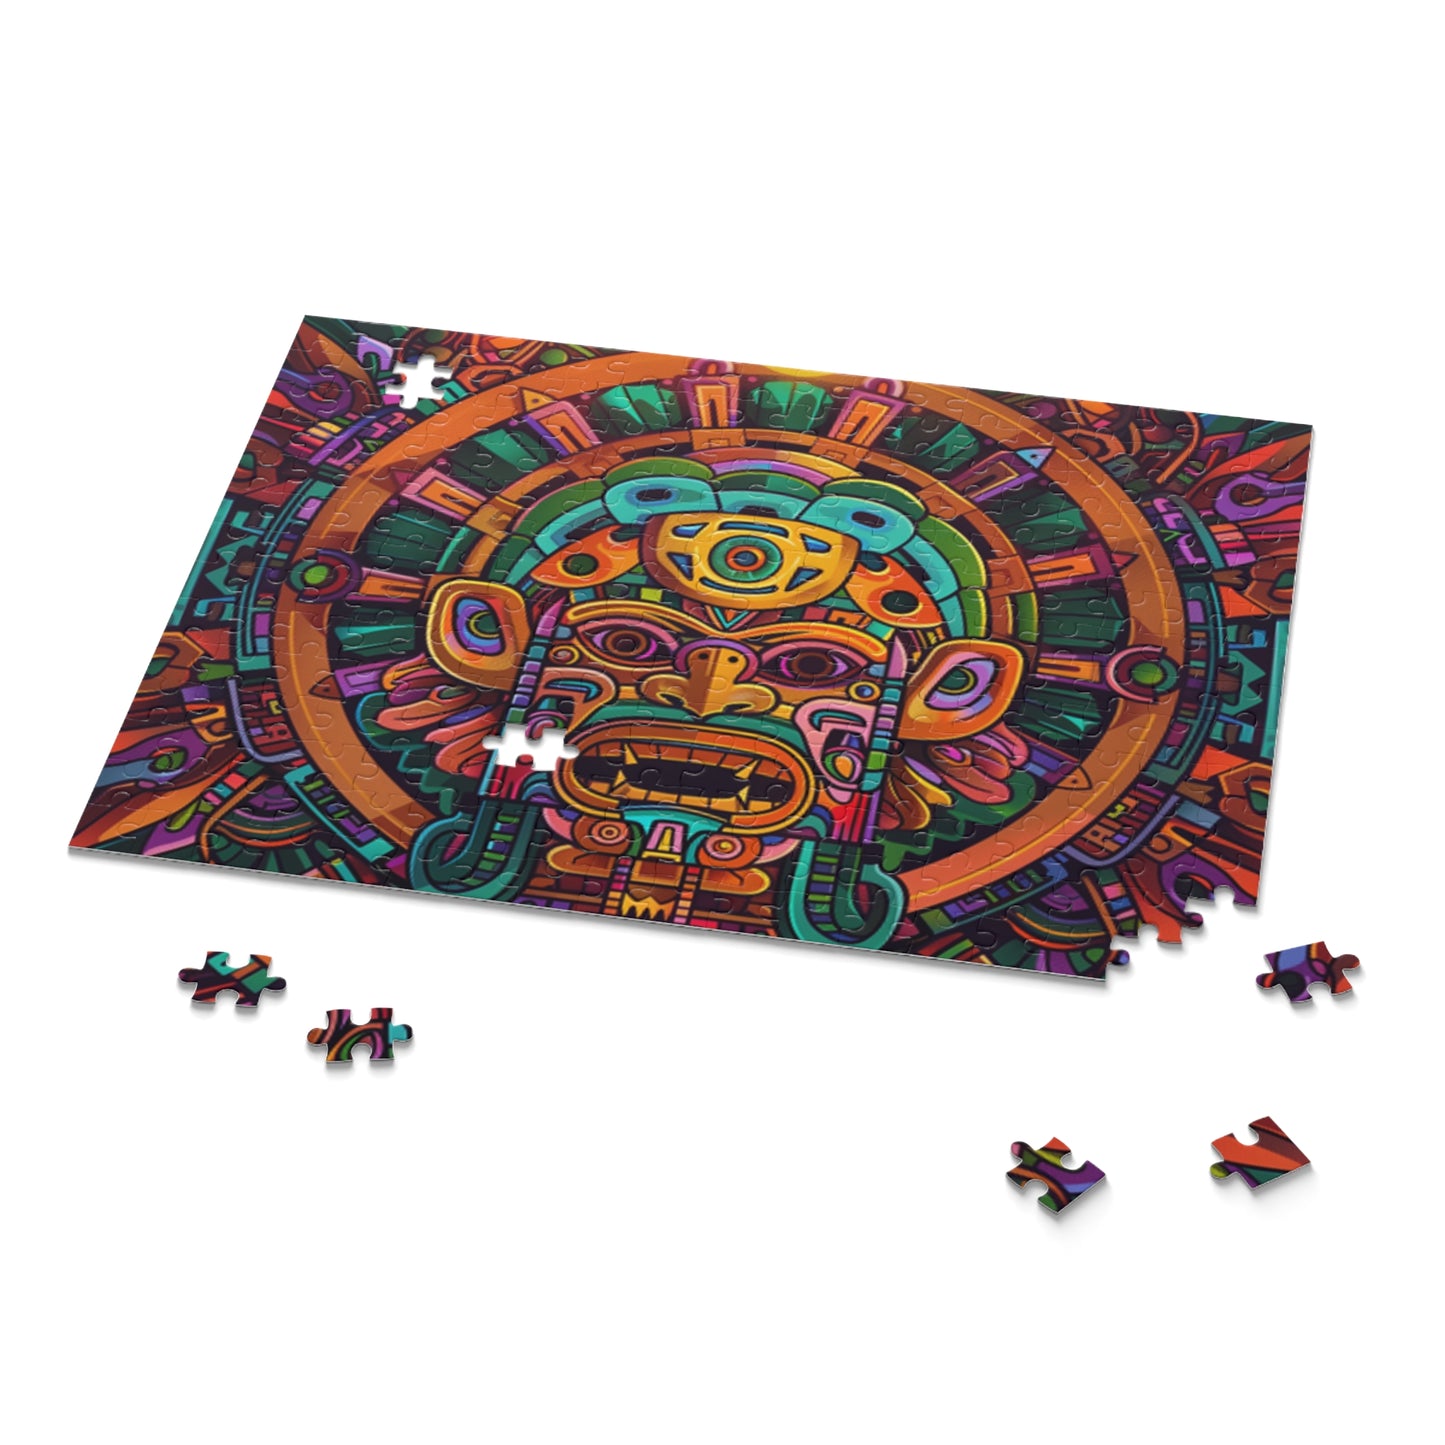 Mexican Men Art Retro Jigsaw Puzzle Adult Birthday Business Jigsaw Puzzle Gift for Him Funny Humorous Indoor Outdoor Game Gift For Her Online-9